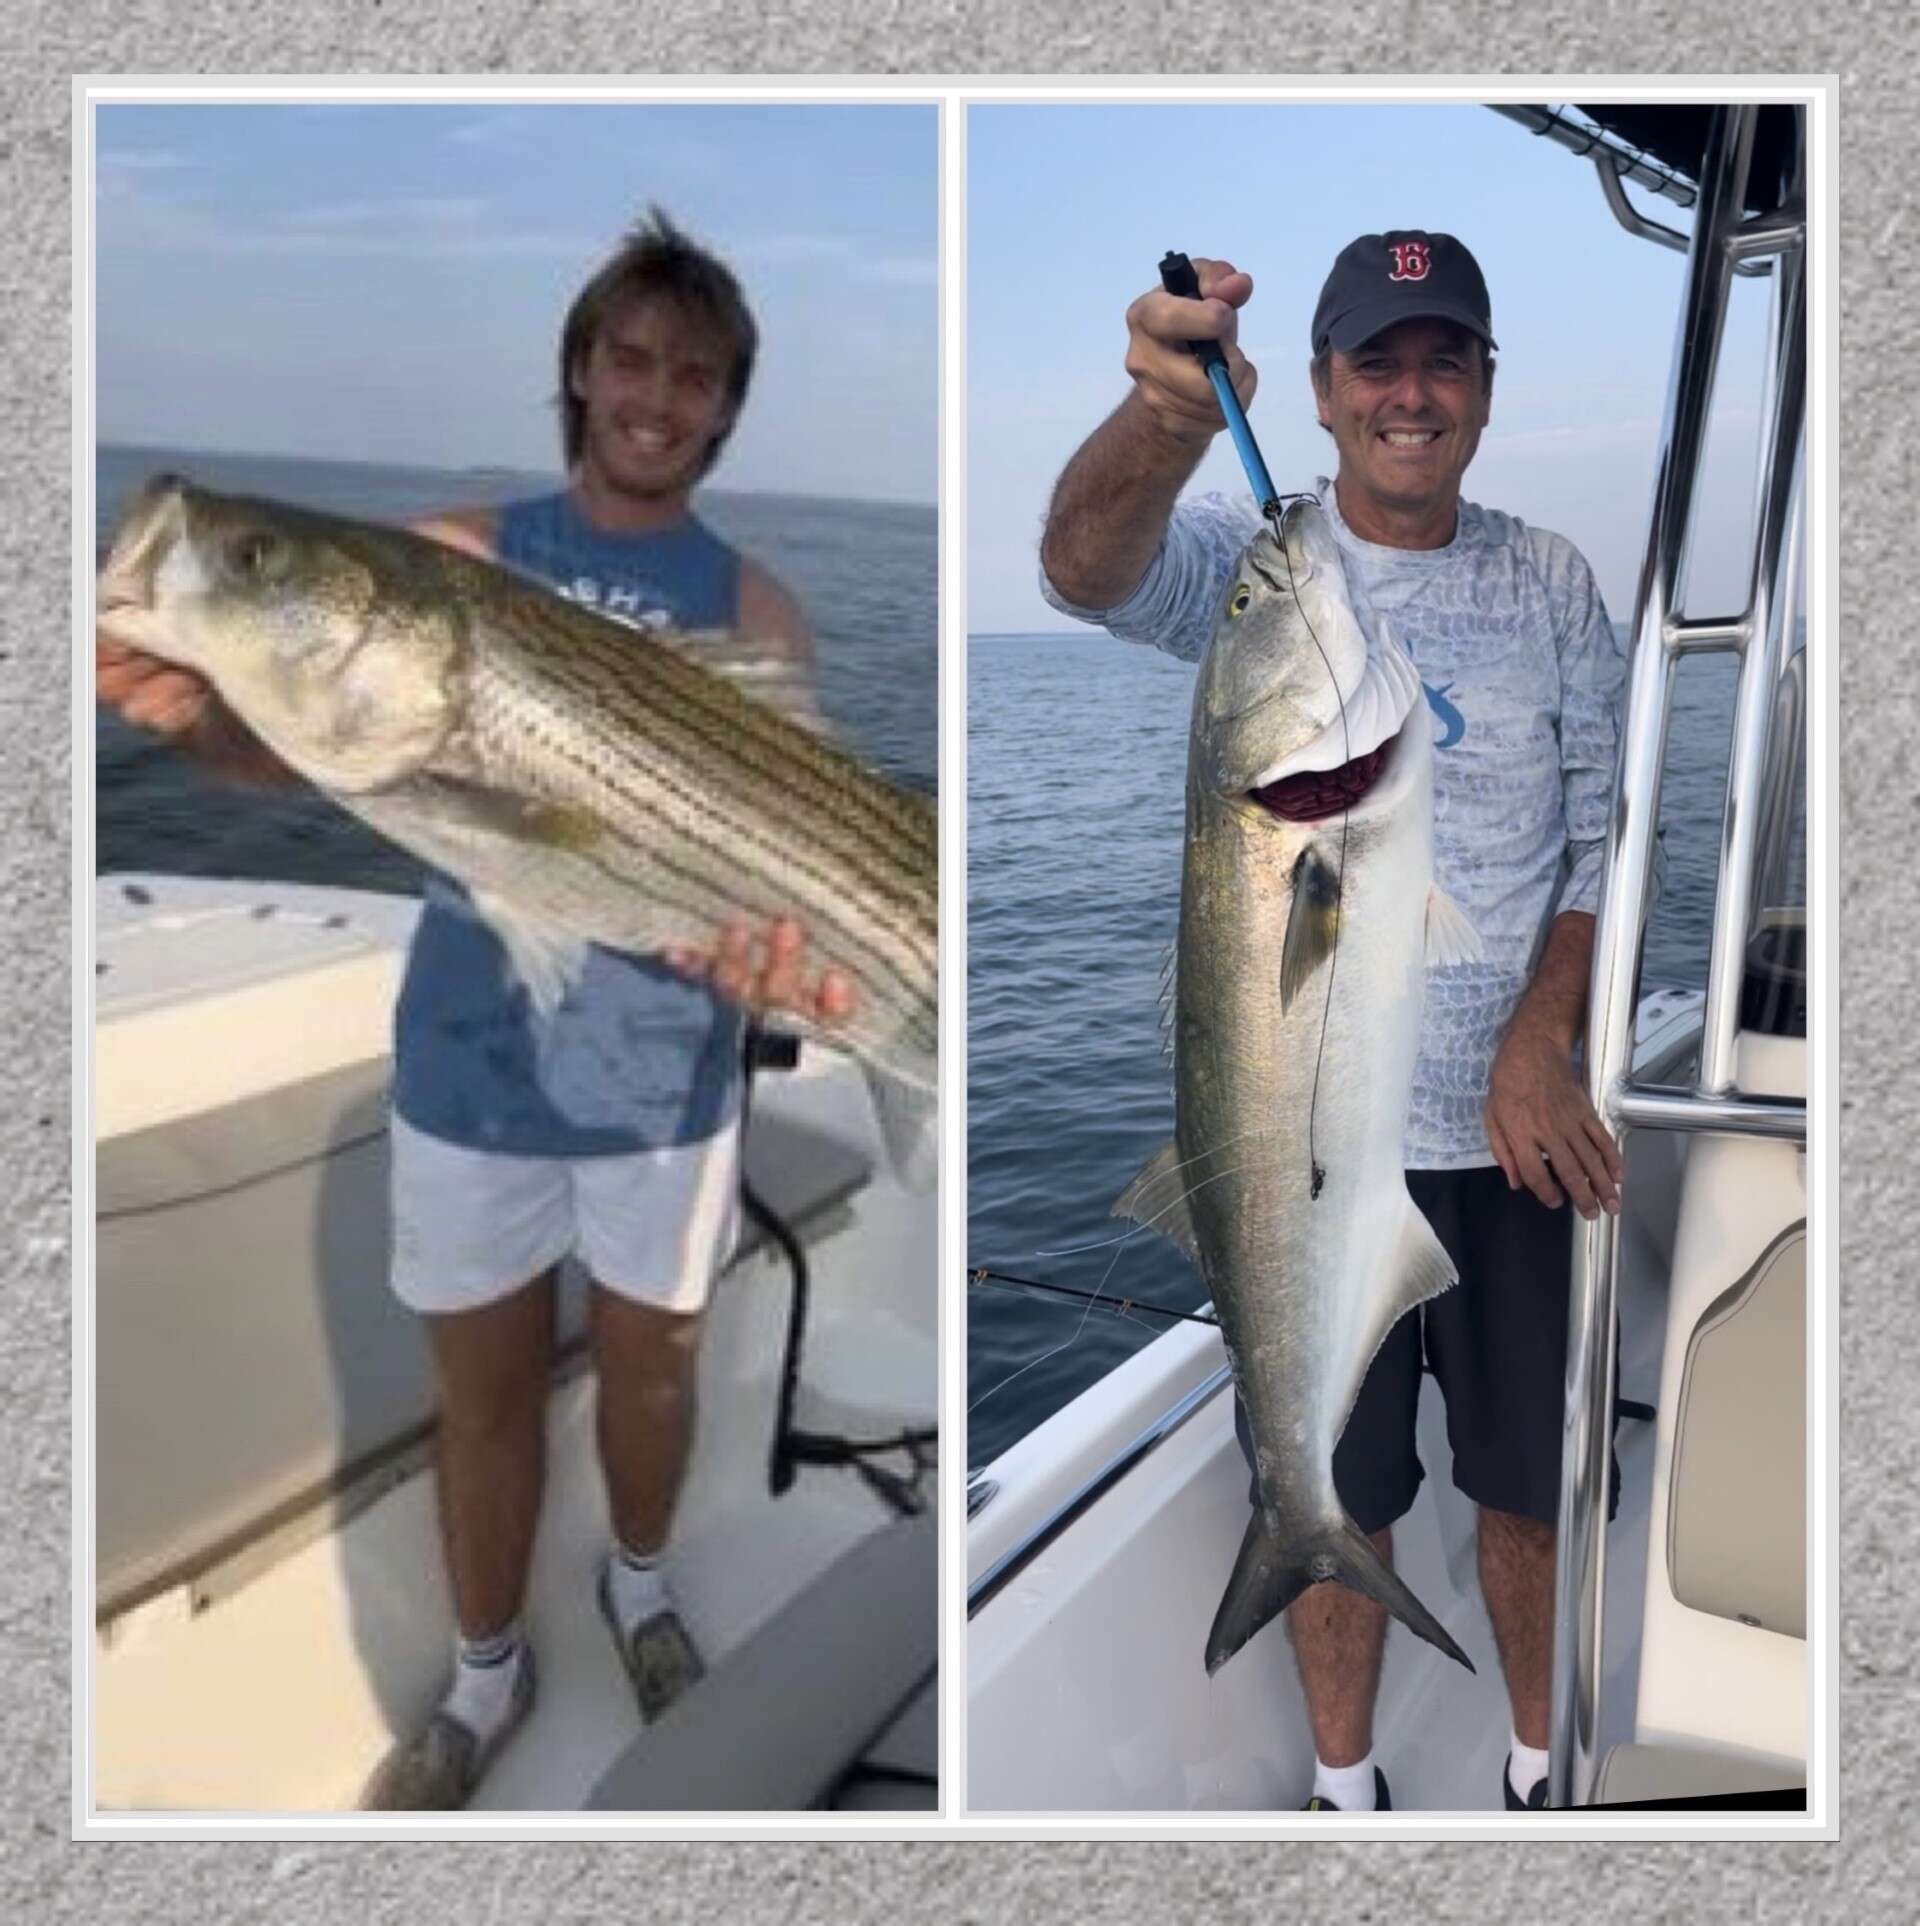 July 1st - What's Next? Summer Fishing in the Long Island Sound